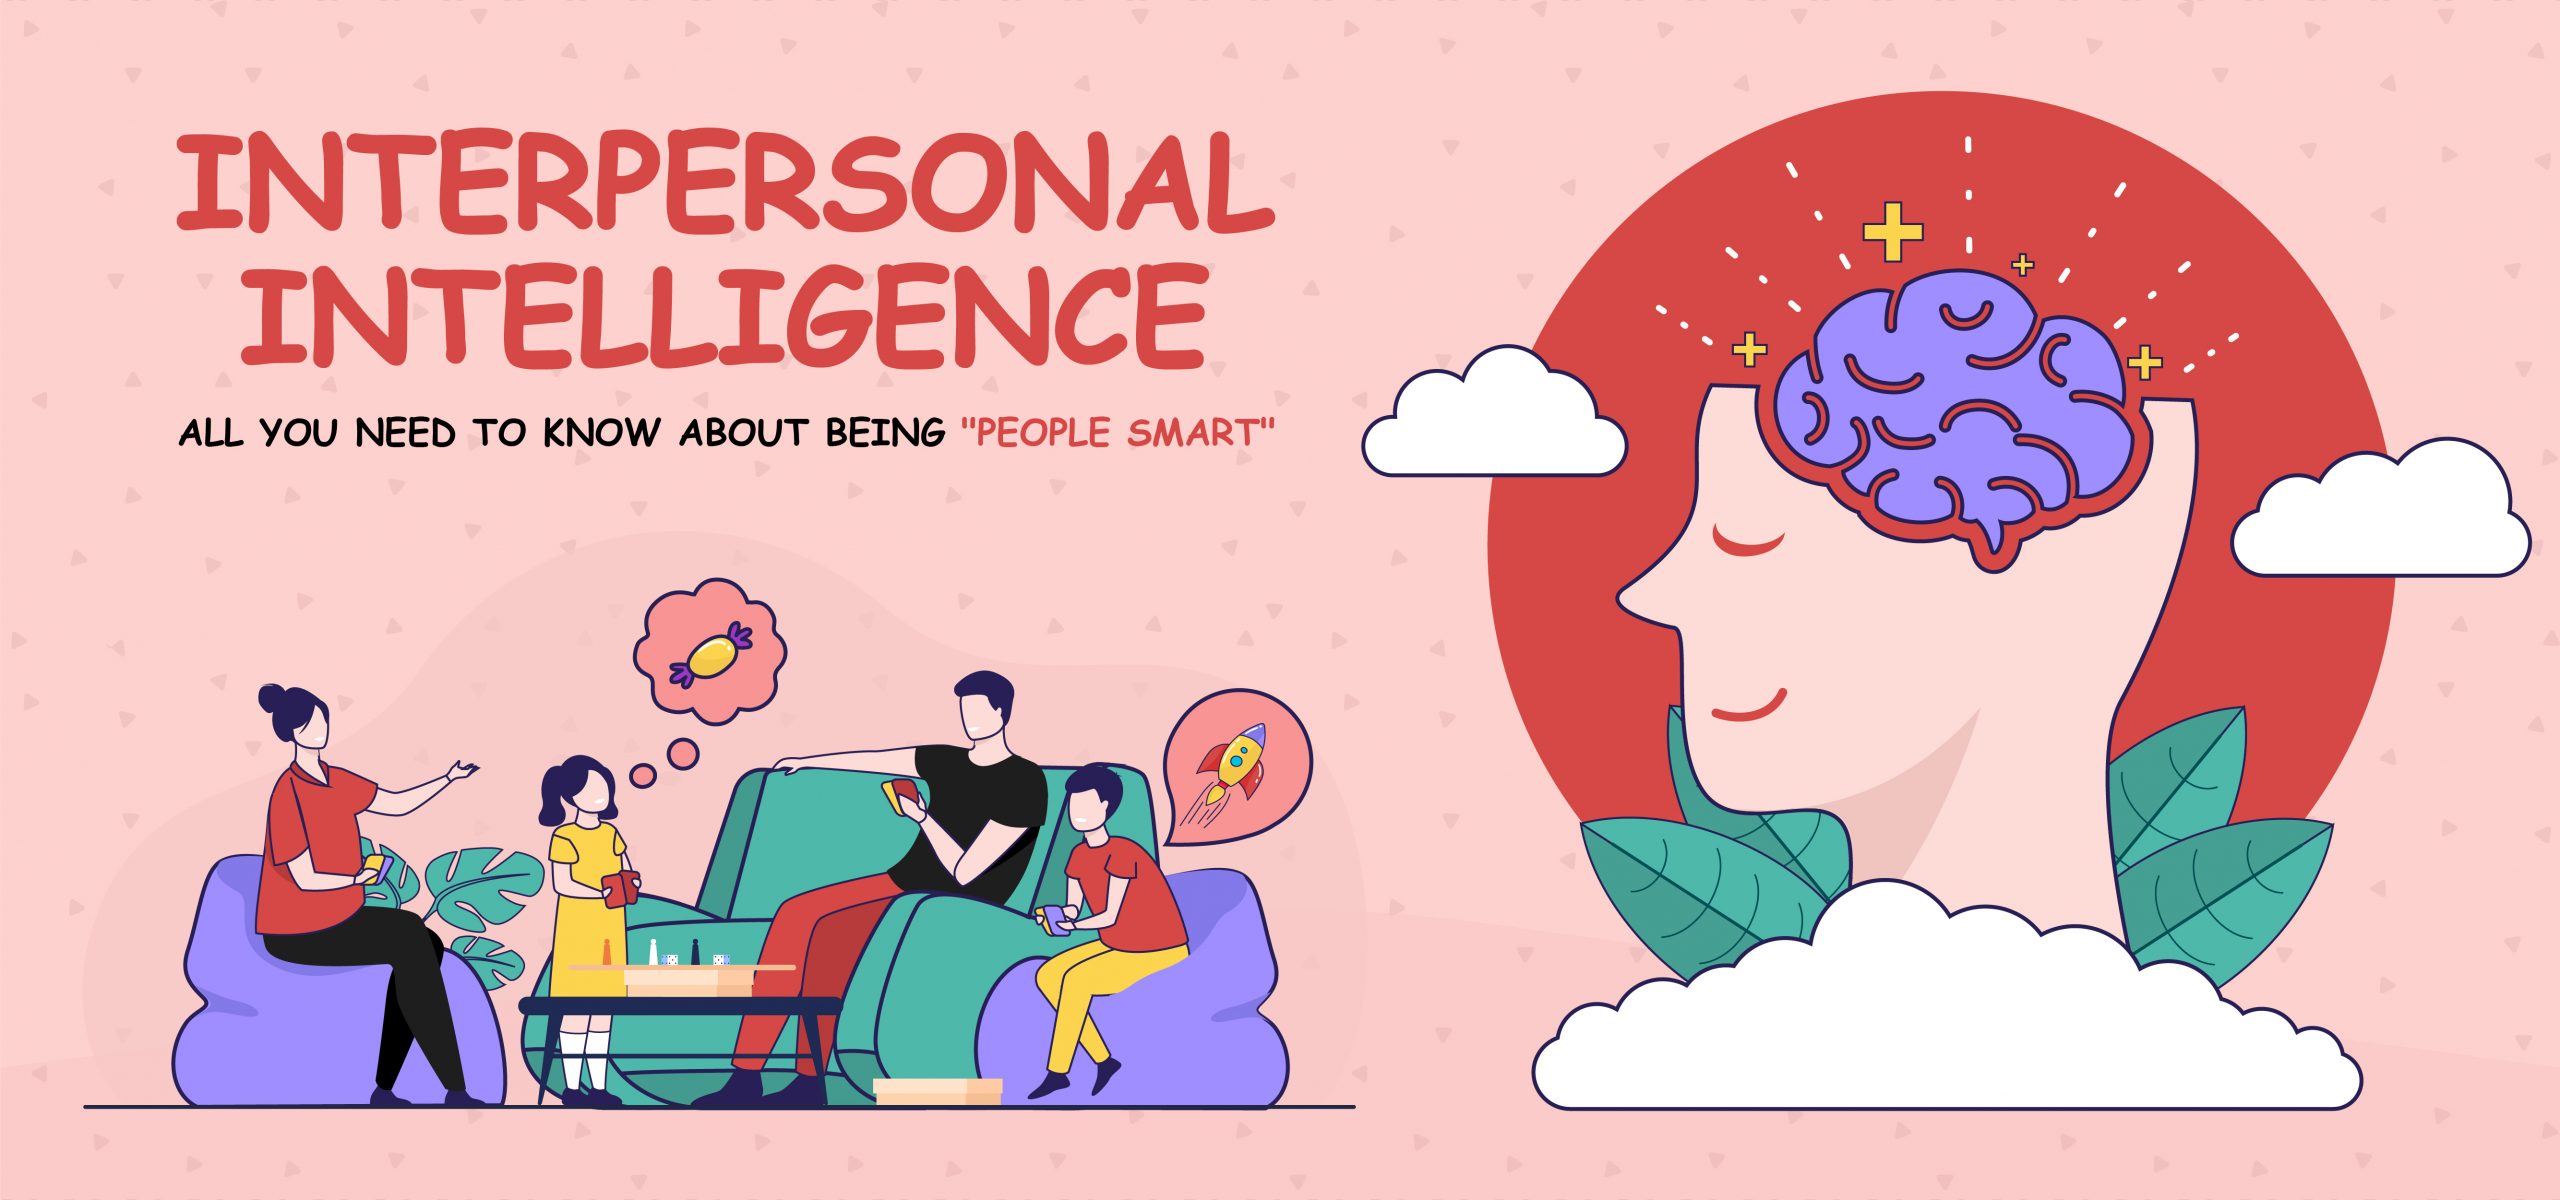 Interpersonal Intelligence: All You Need To Know About Being People Smart